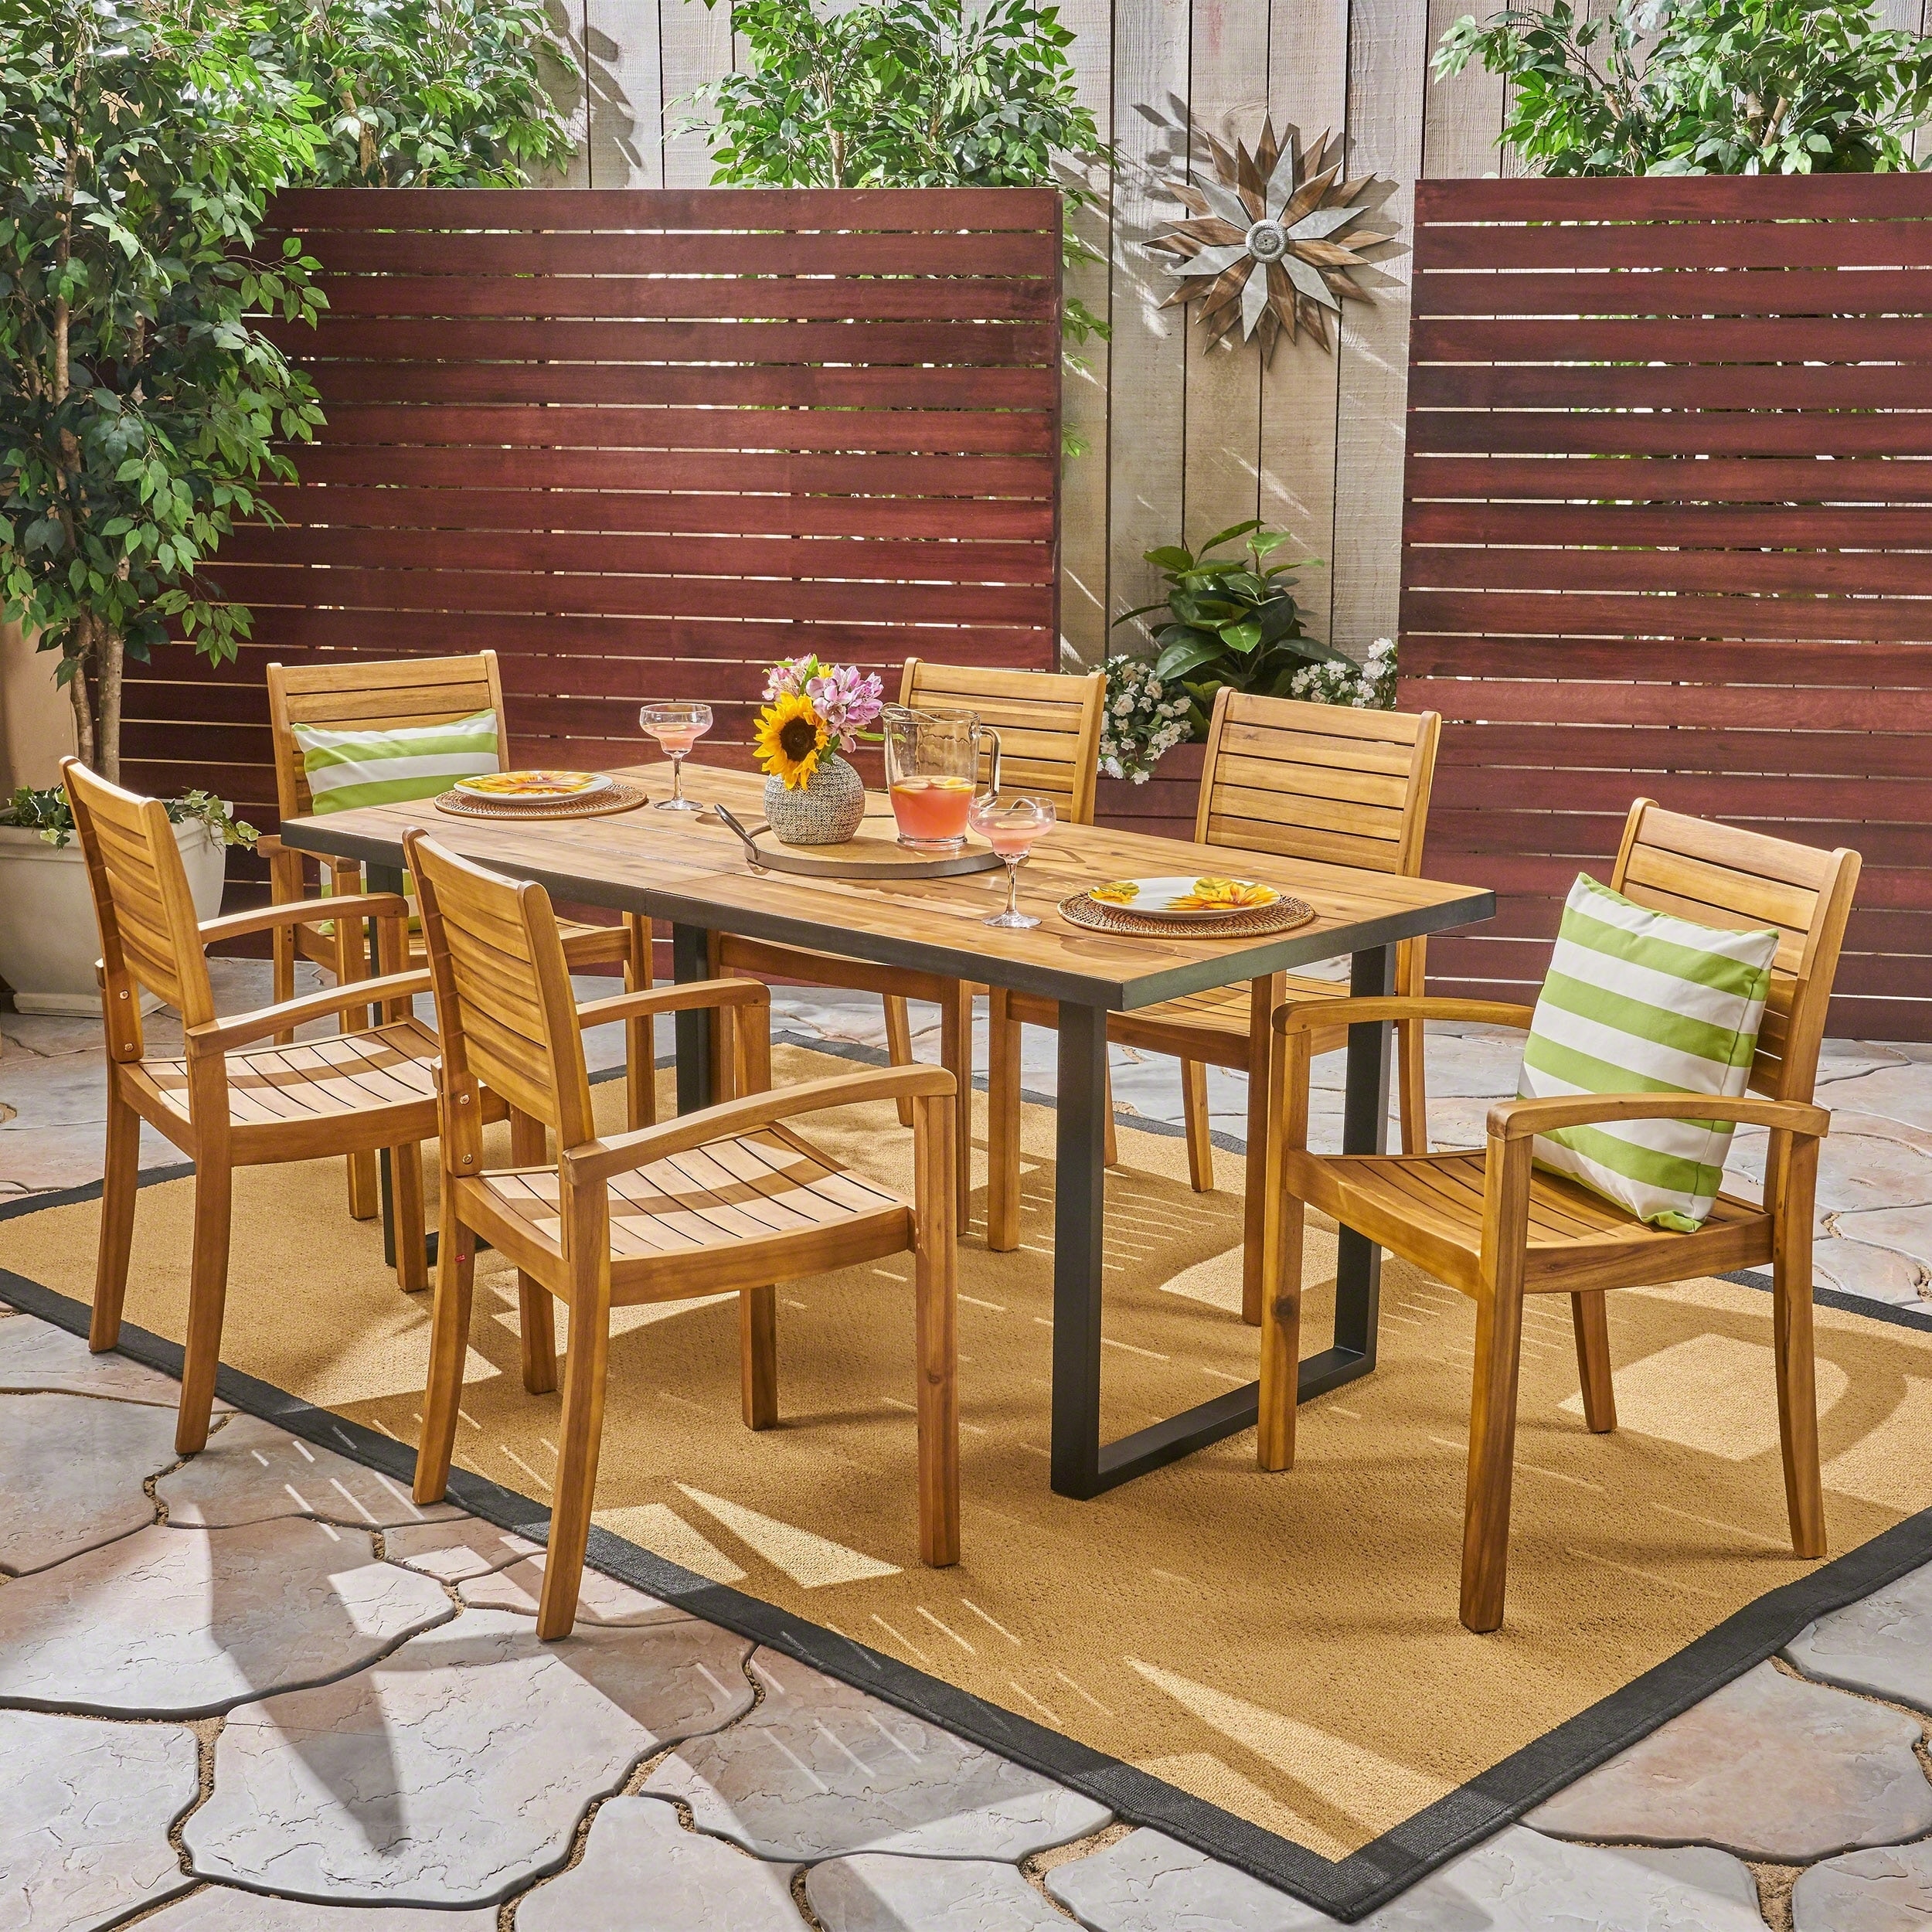 Alderson Outdoor 6-seater Rectangular Acacia Wood Dining Set By Christopher Knight Home